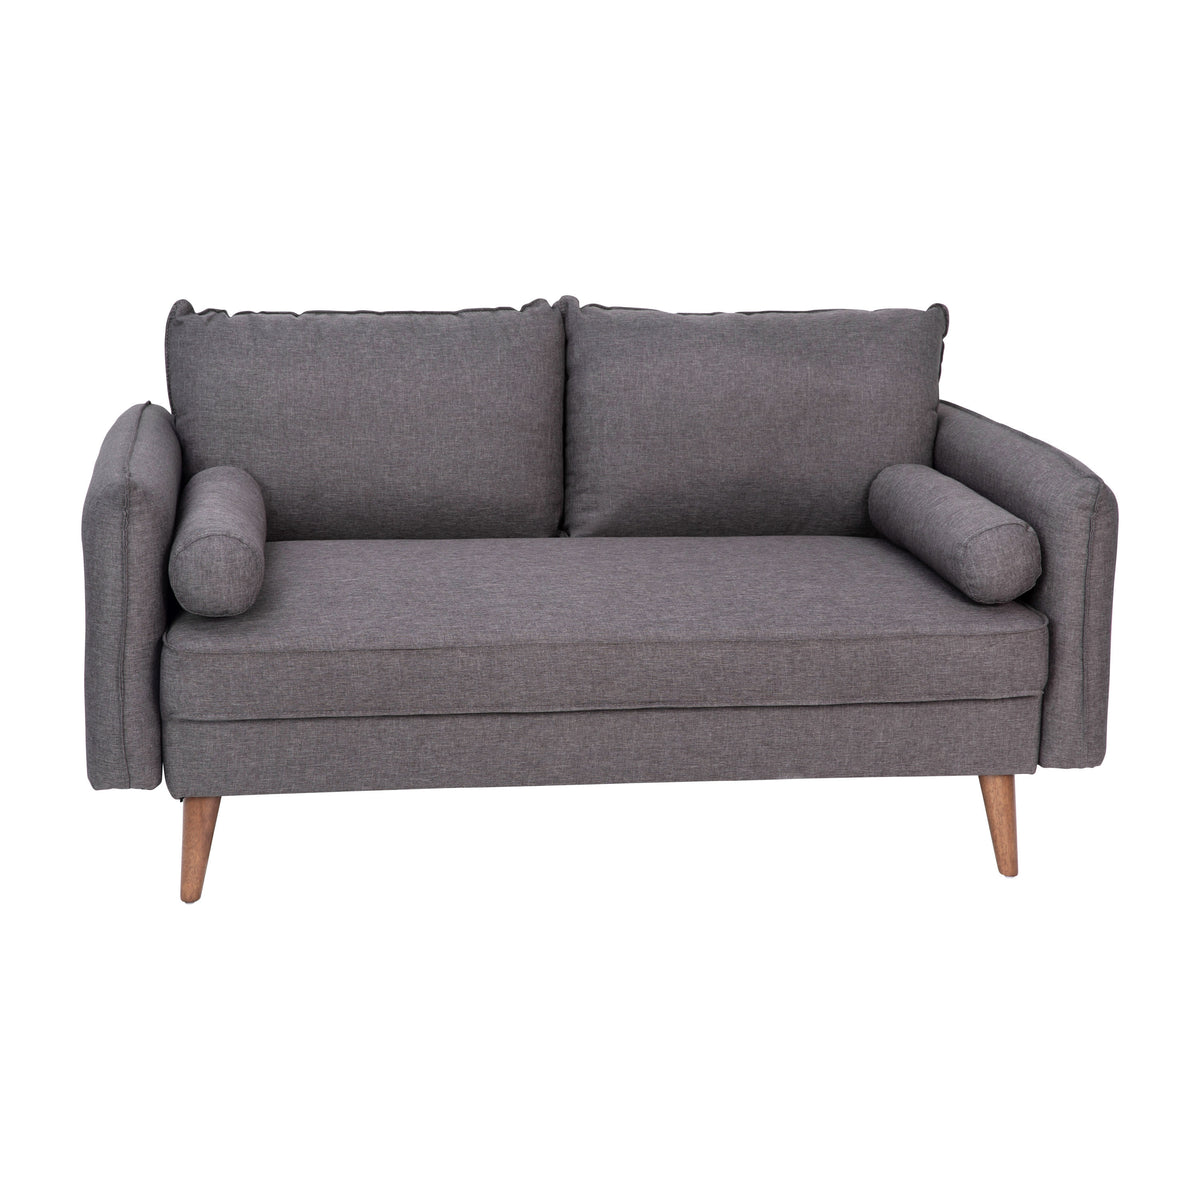 Stone Gray |#| Compact Stone Gray Faux Linen Upholstered Loveseat with Wooden Legs